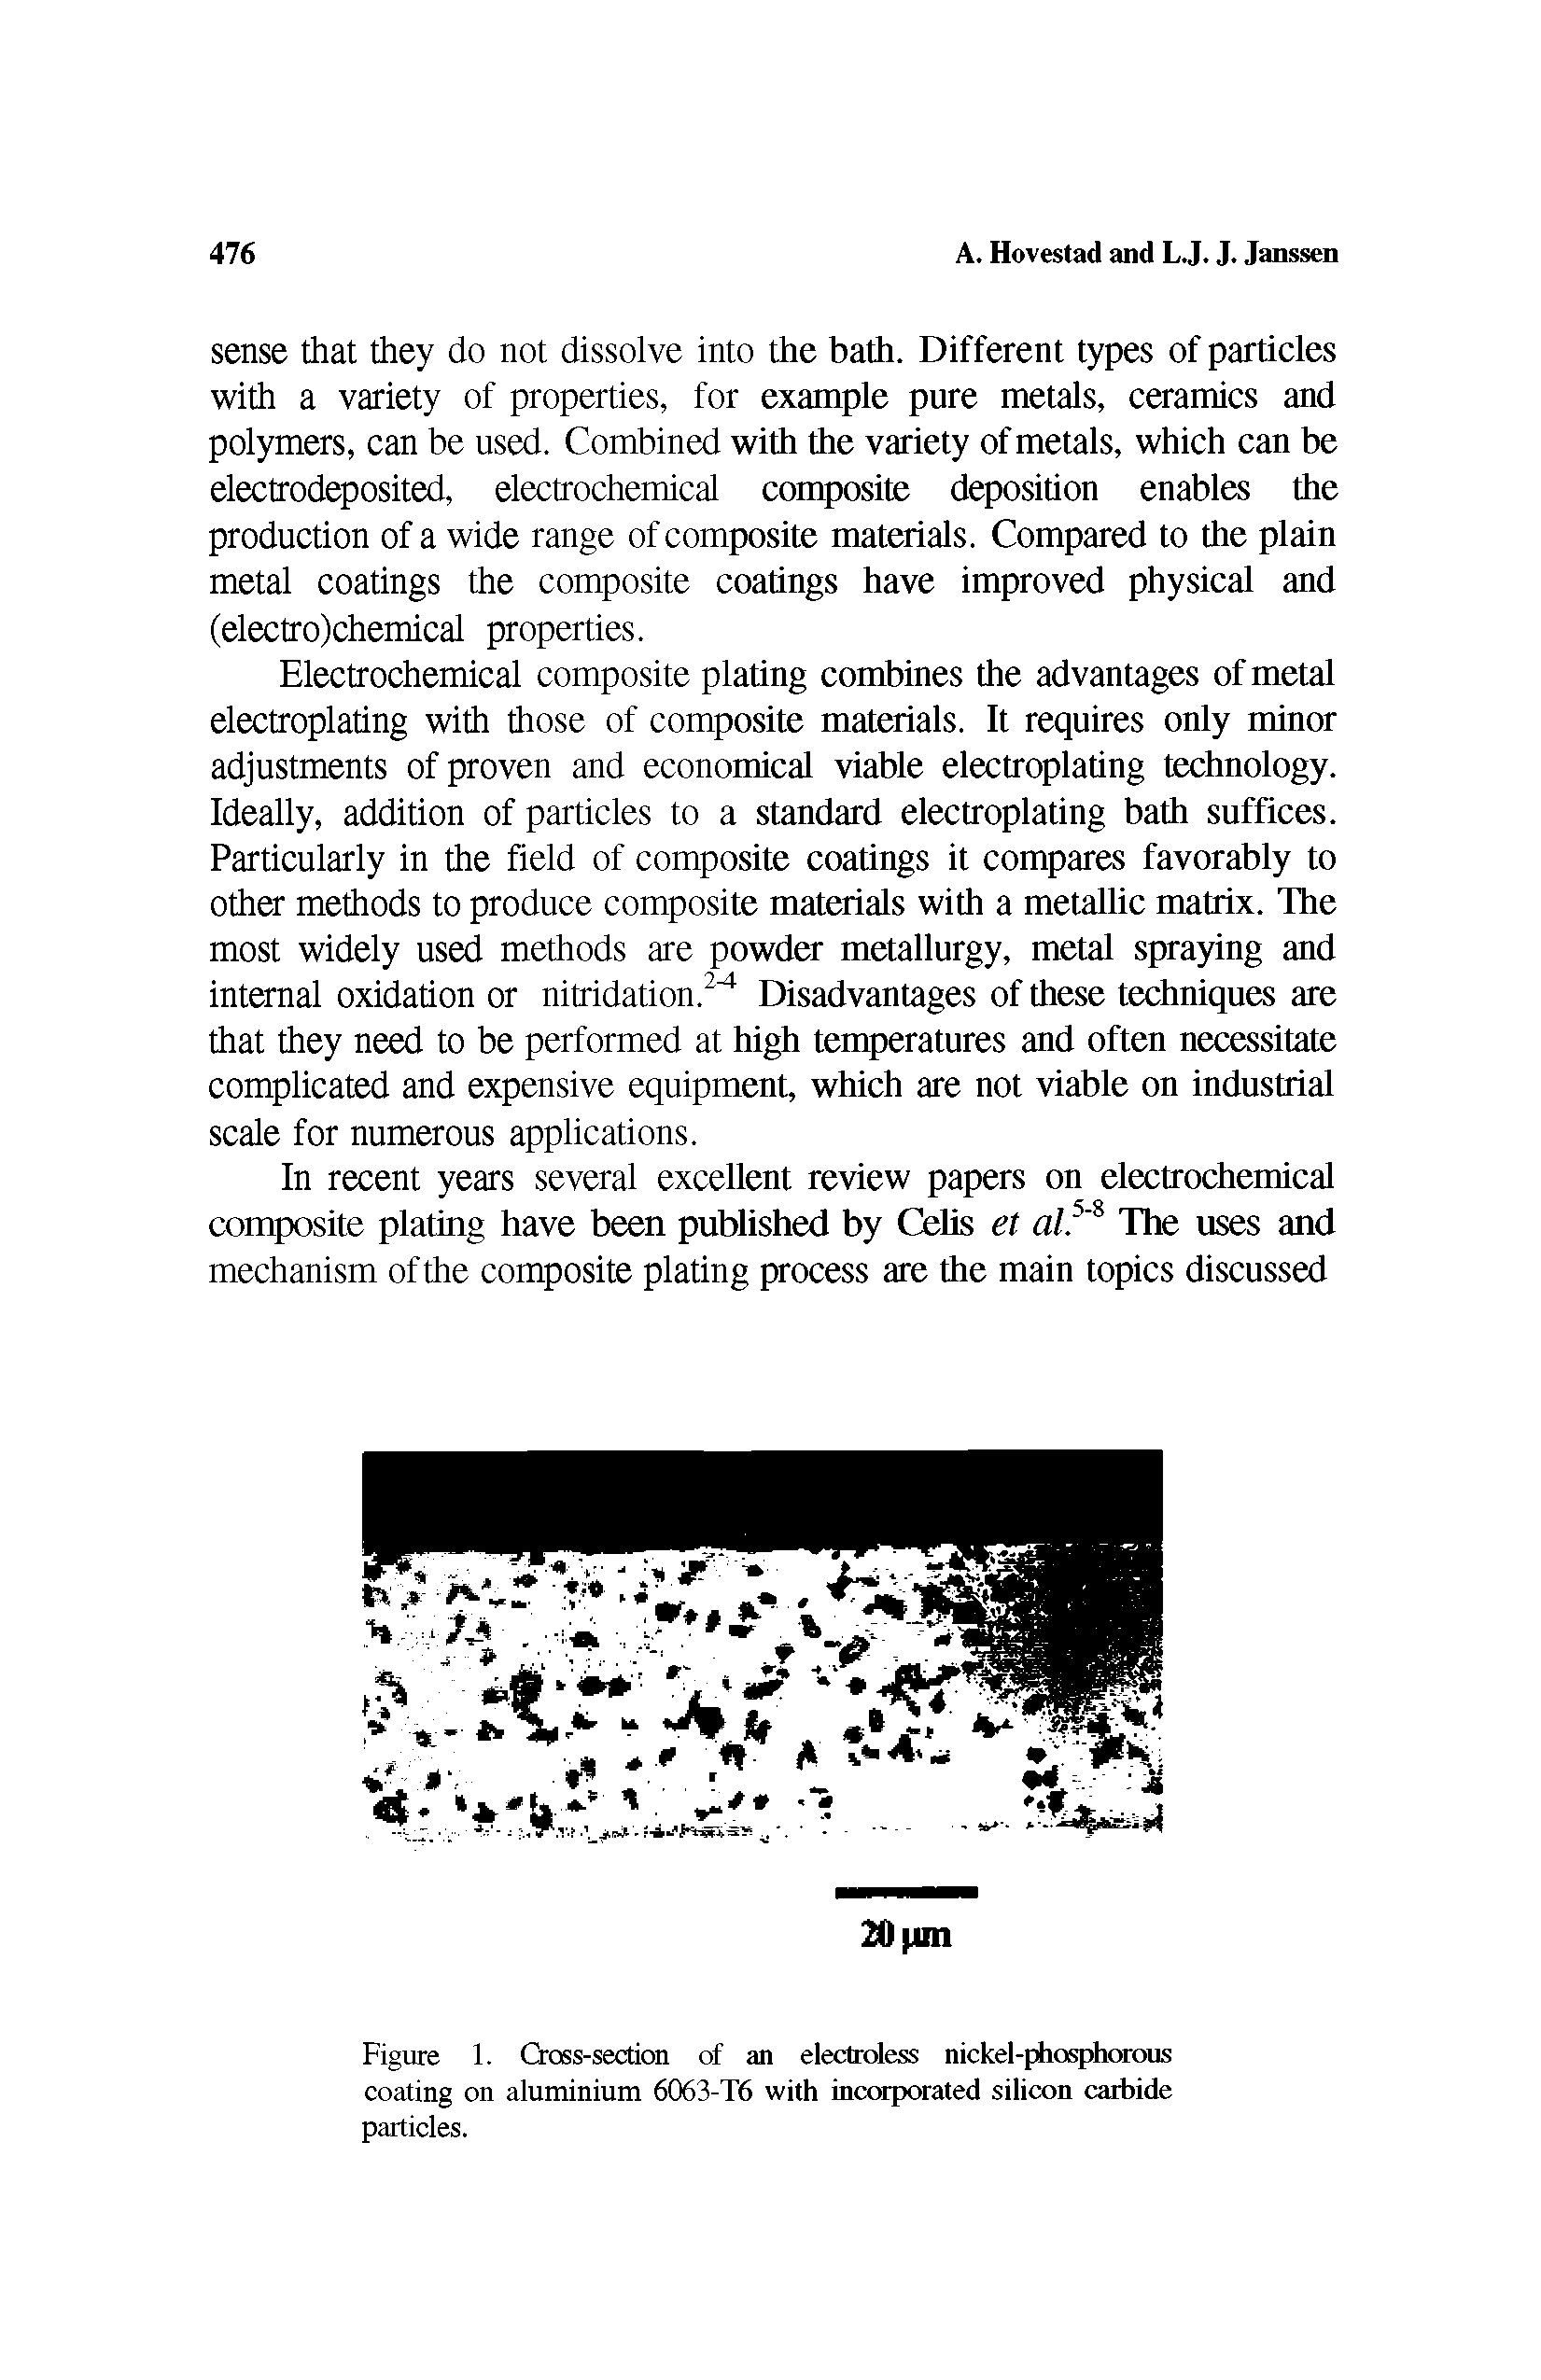 Figure 1. Cross-section of an electroless nickel-phosphorous coating on aluminium 6063-T6 with incorporated silicon carbide particles.